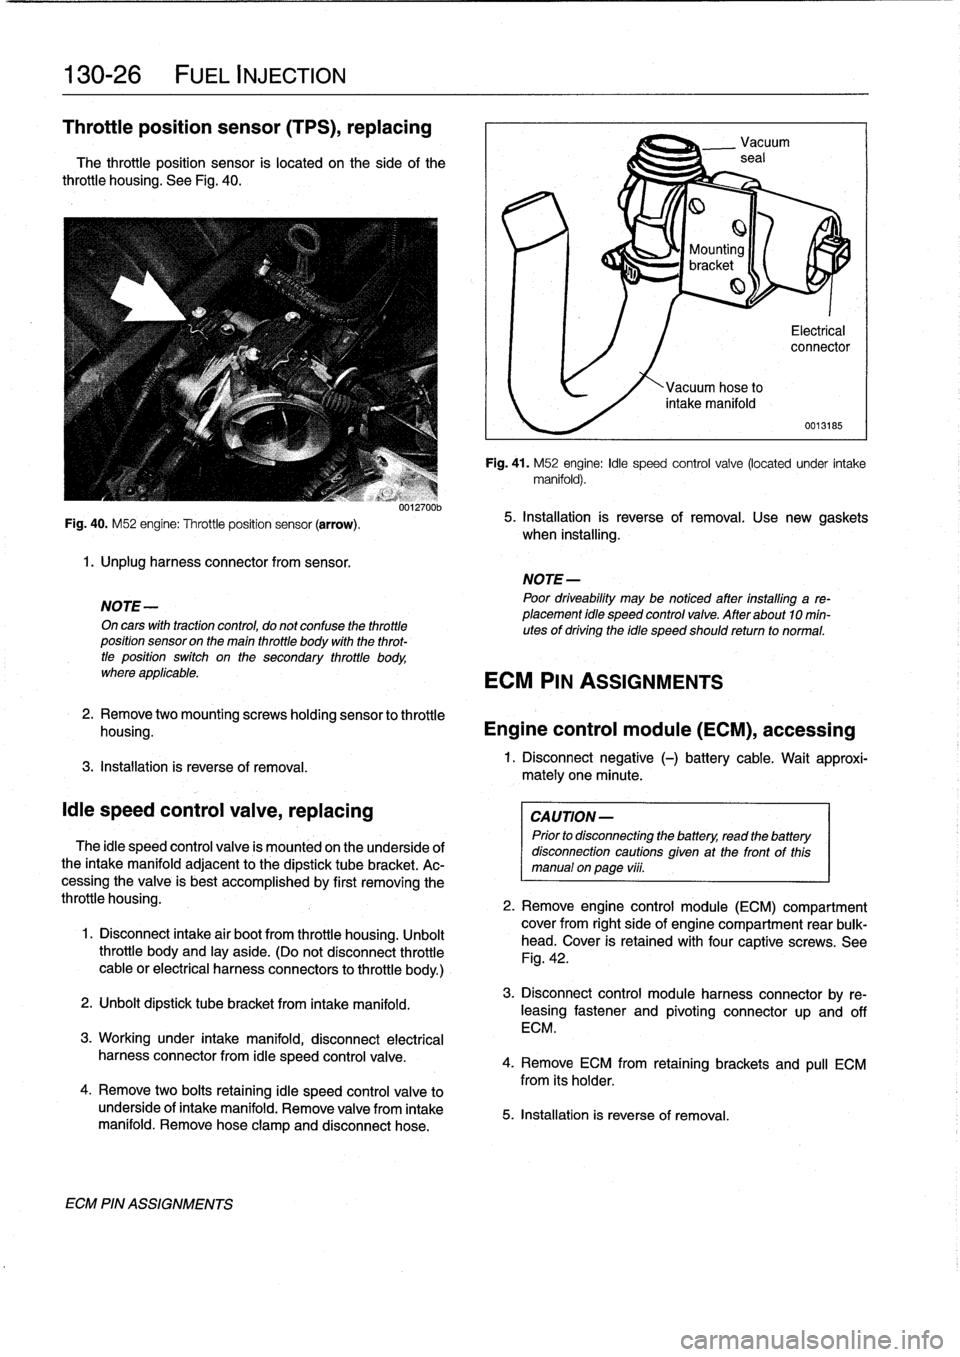 BMW 325i 1992 E36 Workshop Manual 
130-26

	

FUEL
INJECTION

Throttle
position
sensor
(TPS),
replacing

The
throttie
position
sensor
is
located
on
the
side
of
the
throttie
housing
.
See
Fig
.
40
.

Fig
.
40
.
M52
engine
:
Throttle
po